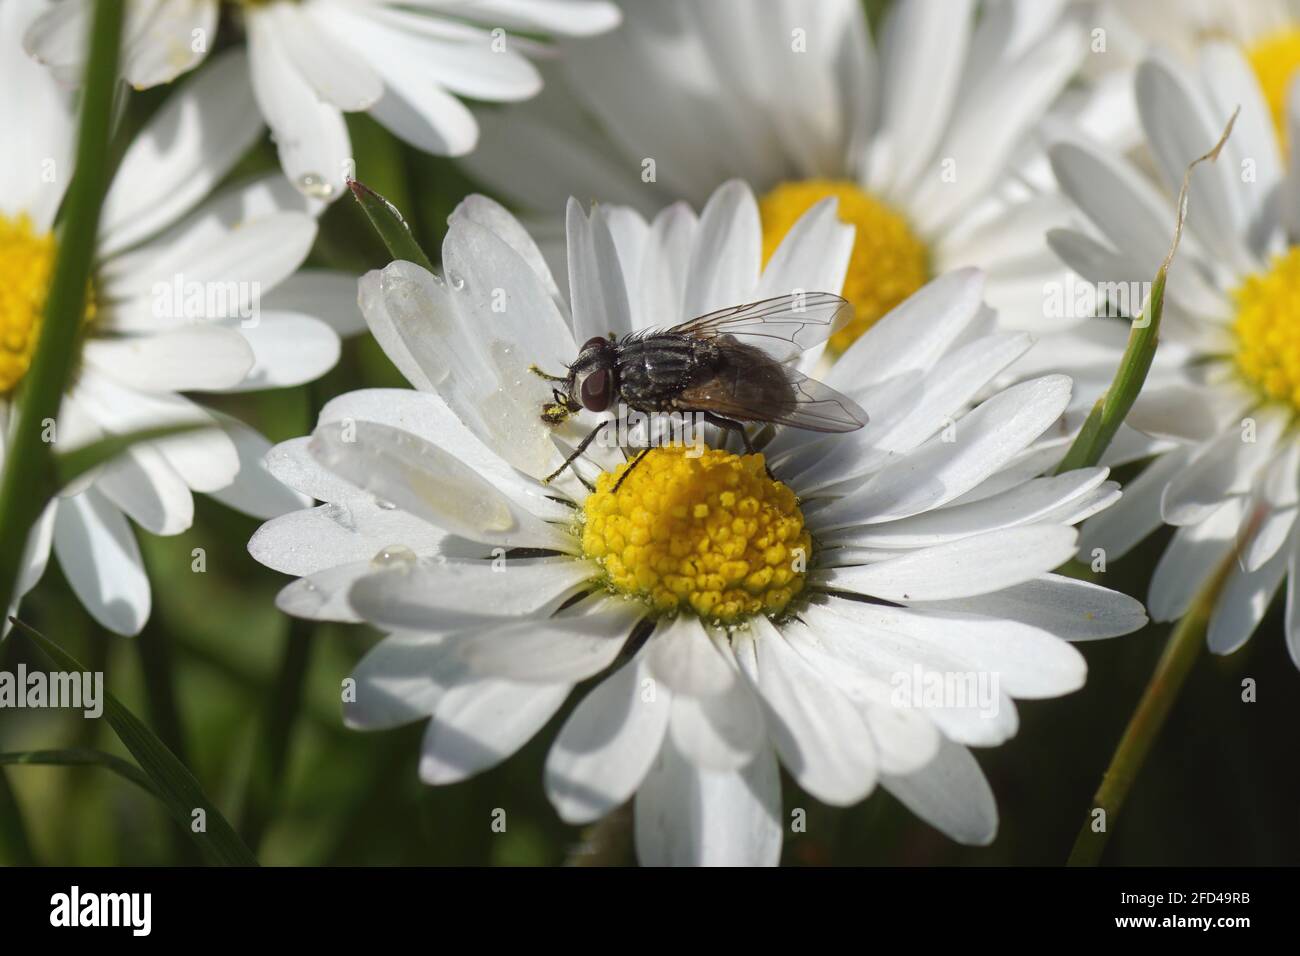 Female face fly, autumn housefly (Musca autumnalis), family Muscidae on a flower of common daisy Bellis perennis, family Asteraceae. Spring, April, Stock Photo